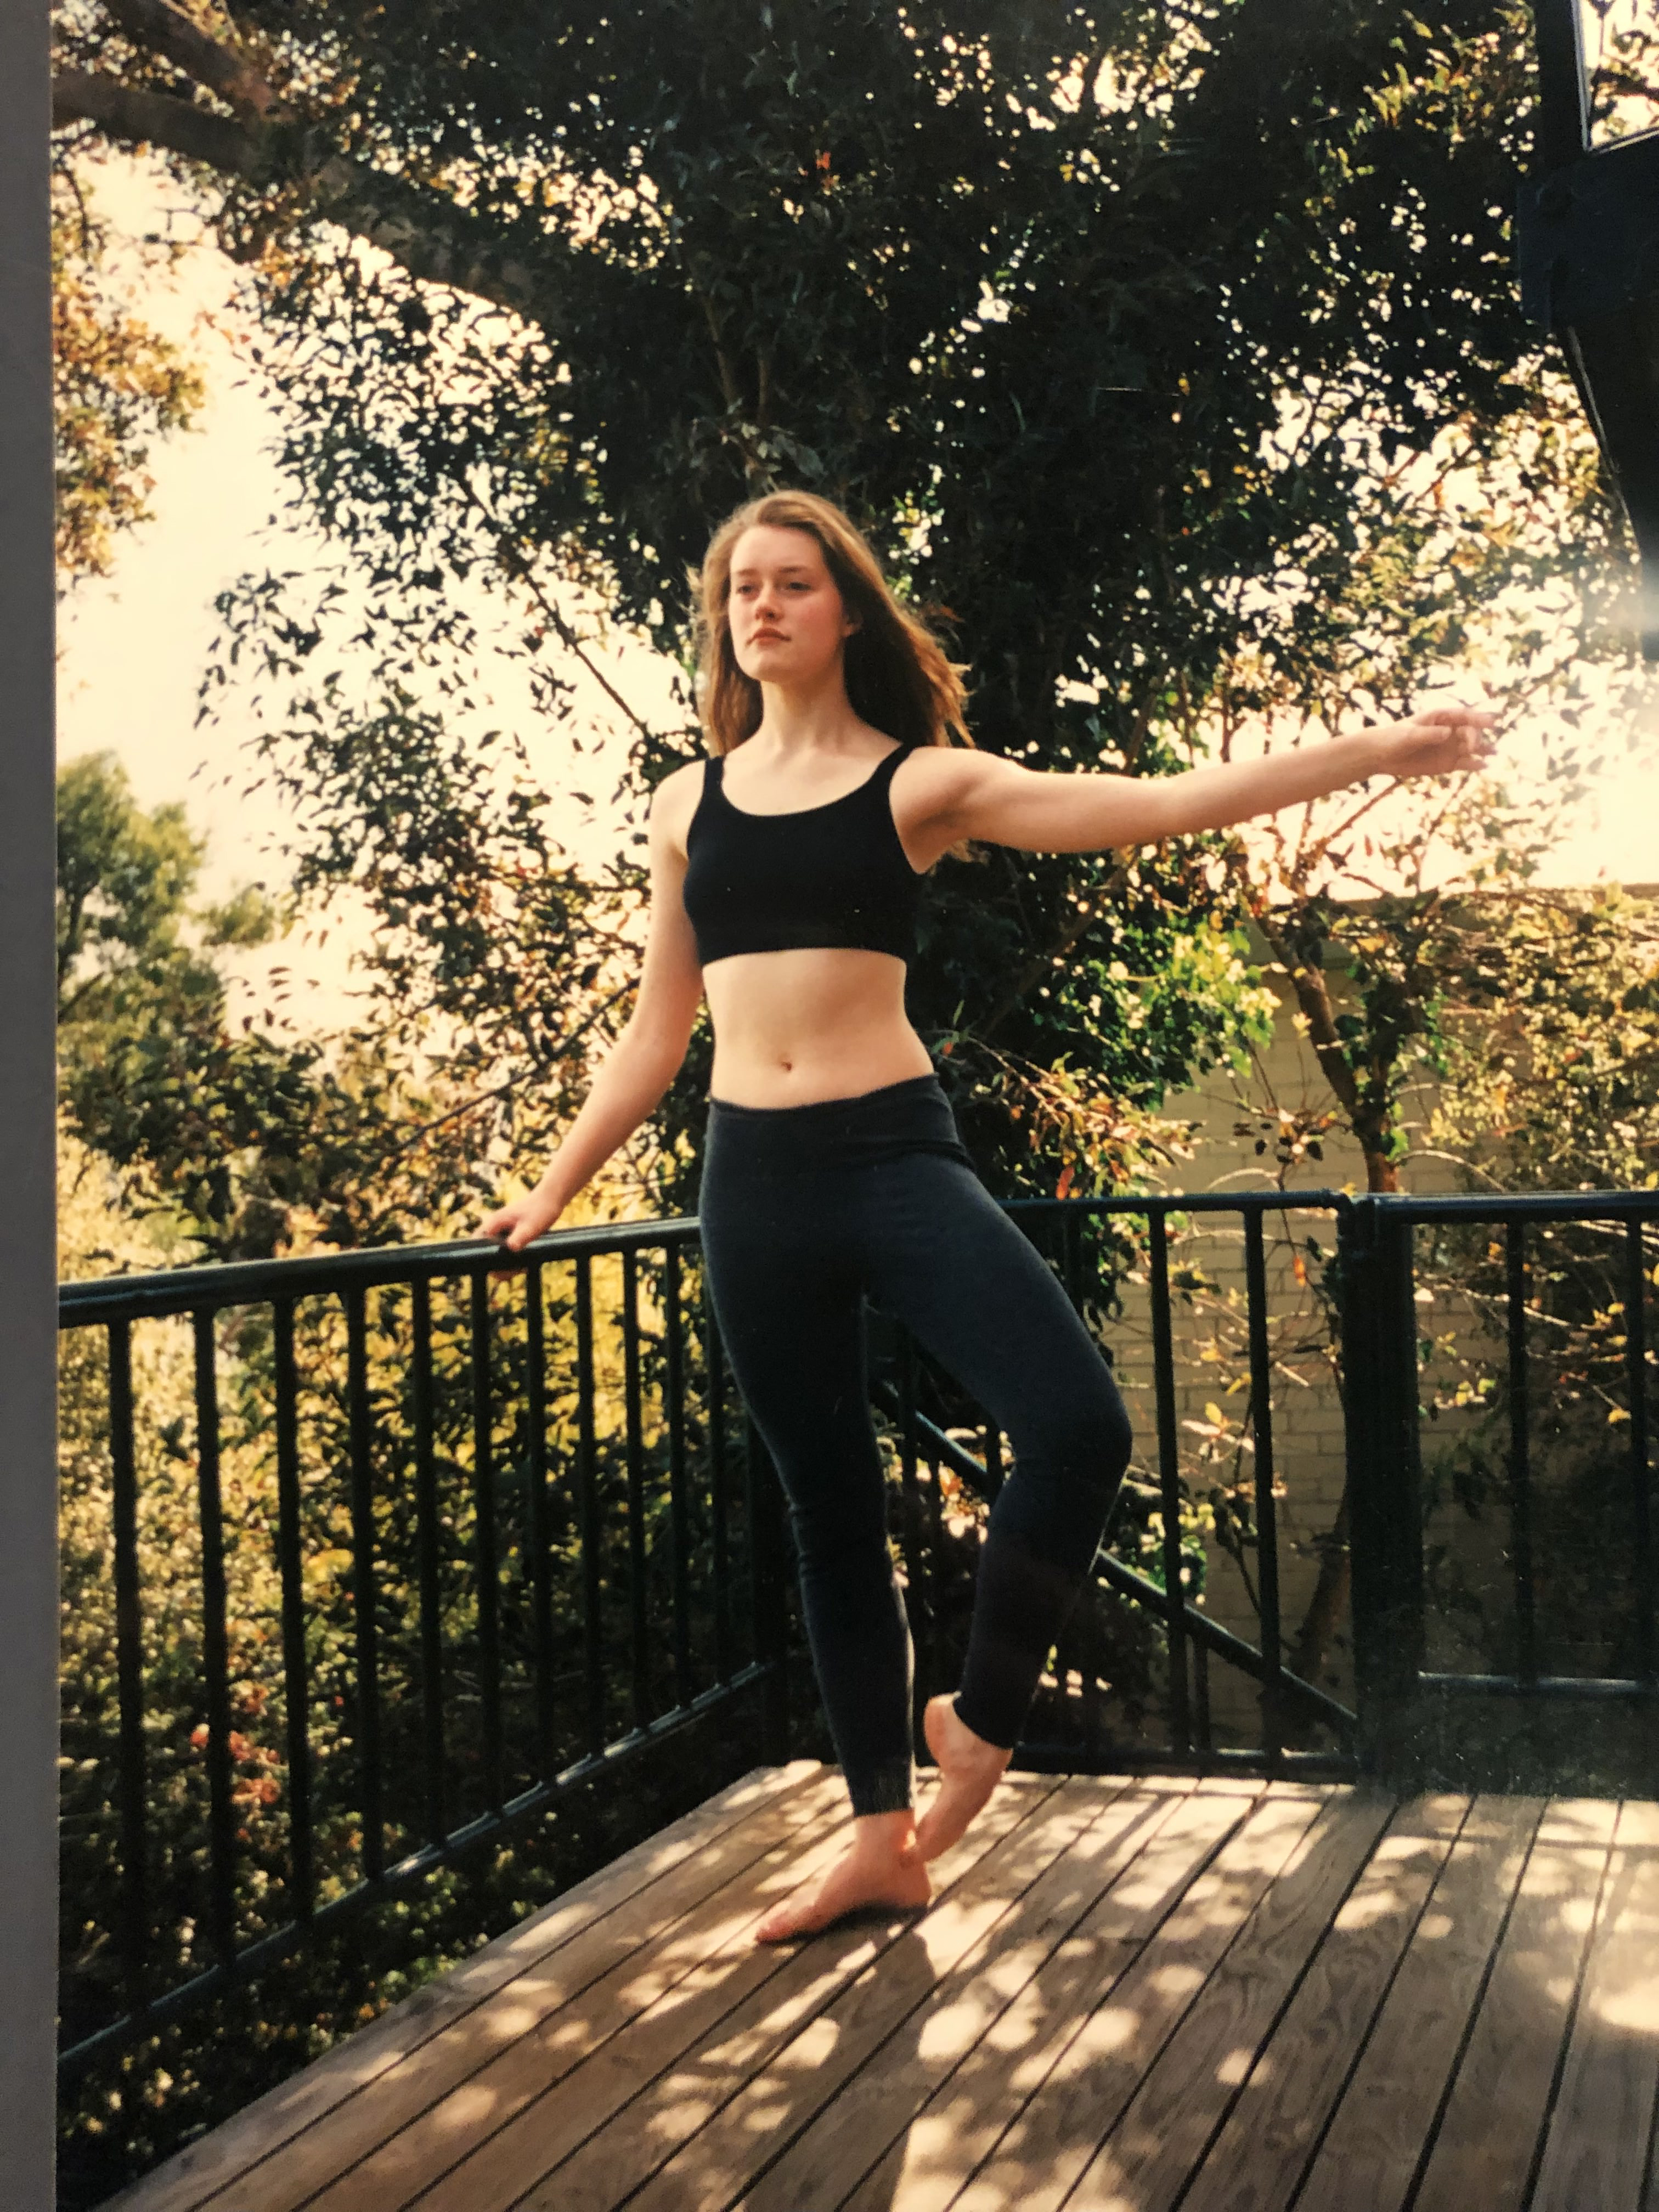 White teenaged girl with mousey brown hair wears black active wear and holds arms in a ballet port de bras on an outdoor deck.